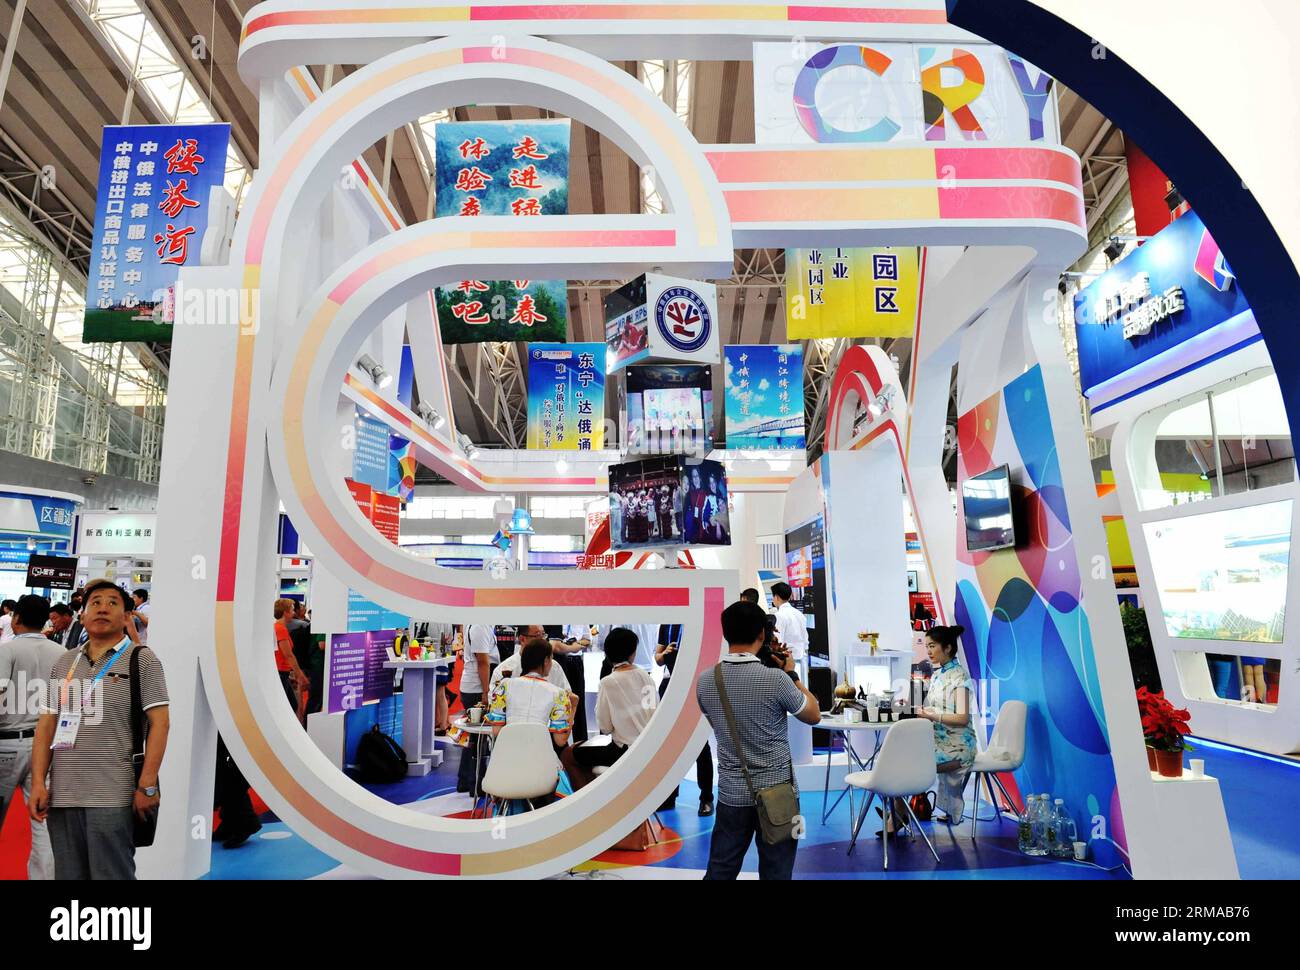 People visit China-Russia Expo (CR Expo) in Harbin, capital of northeast China s Heilongjiang Province, June 30, 2014. The expo, which kicked off on June 30, will last until July 4. (Xinhua/Wang Jianwei) (lfj) CHINA-HEILONGJIANG-CHINA-RUSSIA EXPO (CN) PUBLICATIONxNOTxINxCHN   Celebrities Visit China Russia EXPO CR EXPO in Harbin Capital of Northeast China S Heilongjiang Province June 30 2014 The EXPO Which kicked off ON June 30 will Load Until July 4 XINHUA Wang Jianwei  China Heilongjiang China Russia EXPO CN PUBLICATIONxNOTxINxCHN Stock Photo